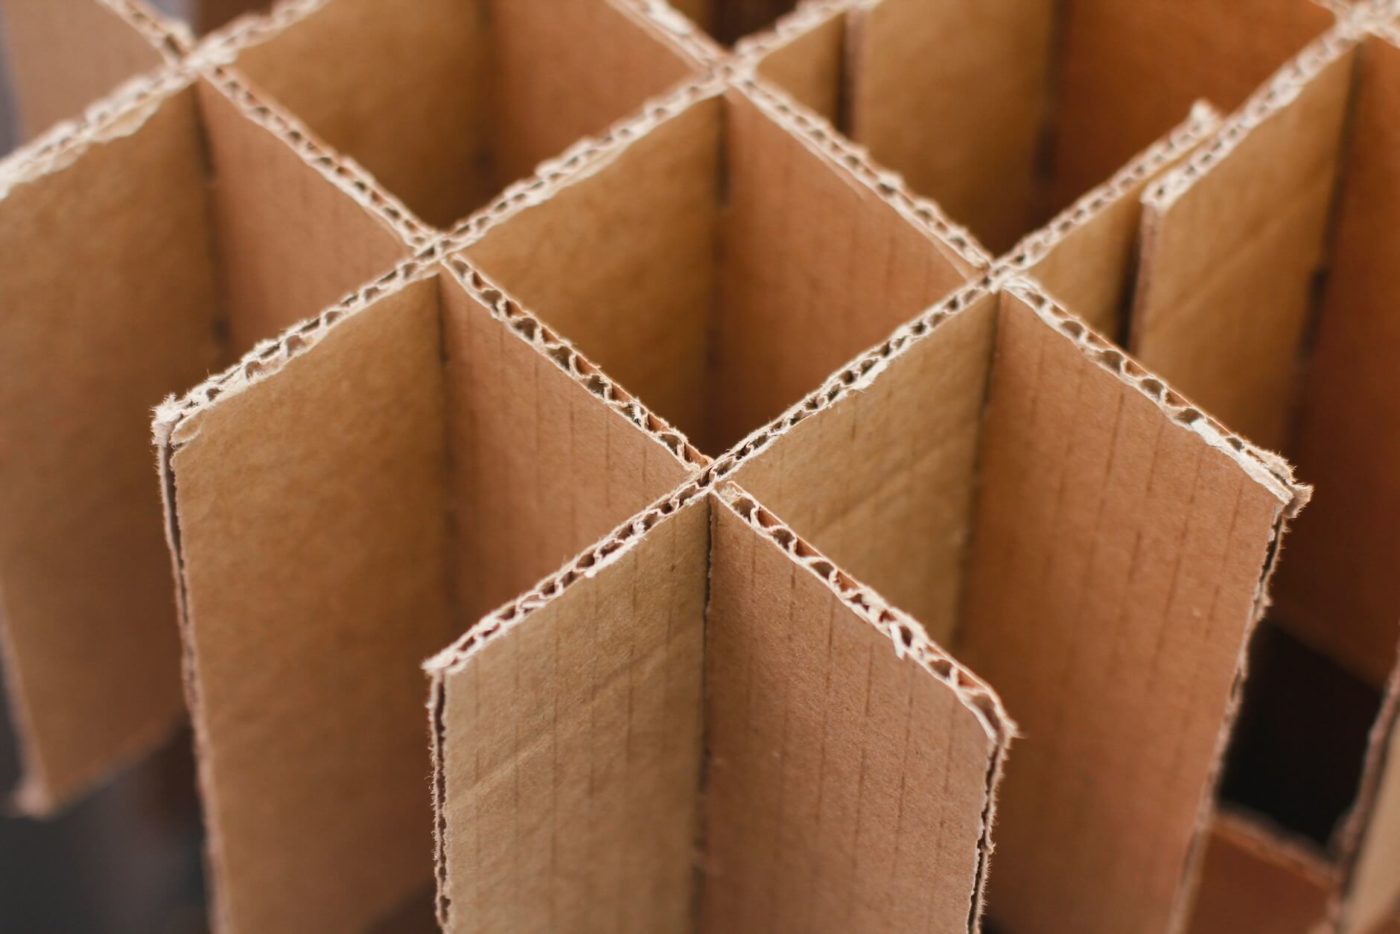 Cardboard compartments pictured up close